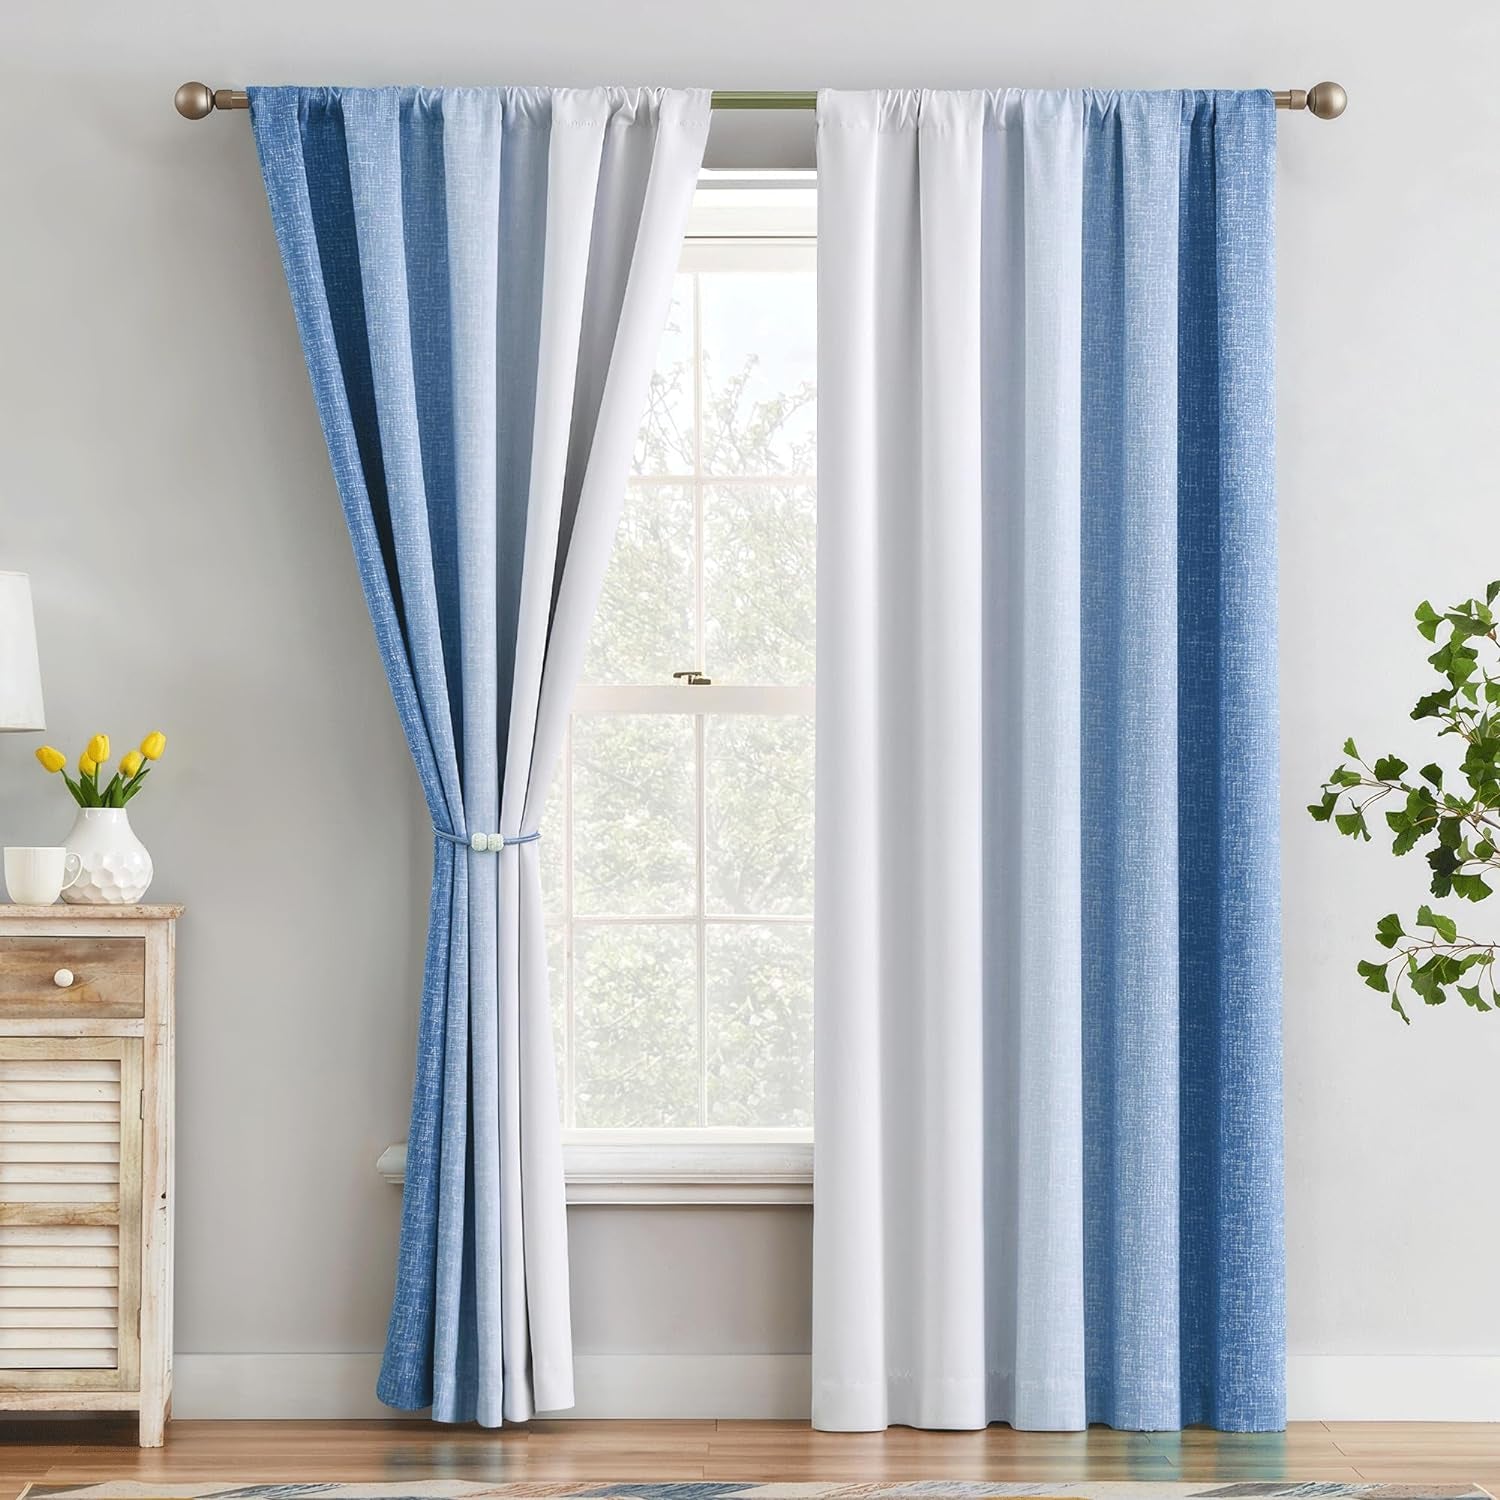 Geomoroccan Ombre 100% Blackout Curtains 84 Inches Long, Pink and White 2 Tone Reversible Window Treatments for Bedroom Living Room, Linen Gradient Print Rod Pocket Drapes 52" W 2 Panel Sets  Geomoroccan Blue 52"X95"X2 